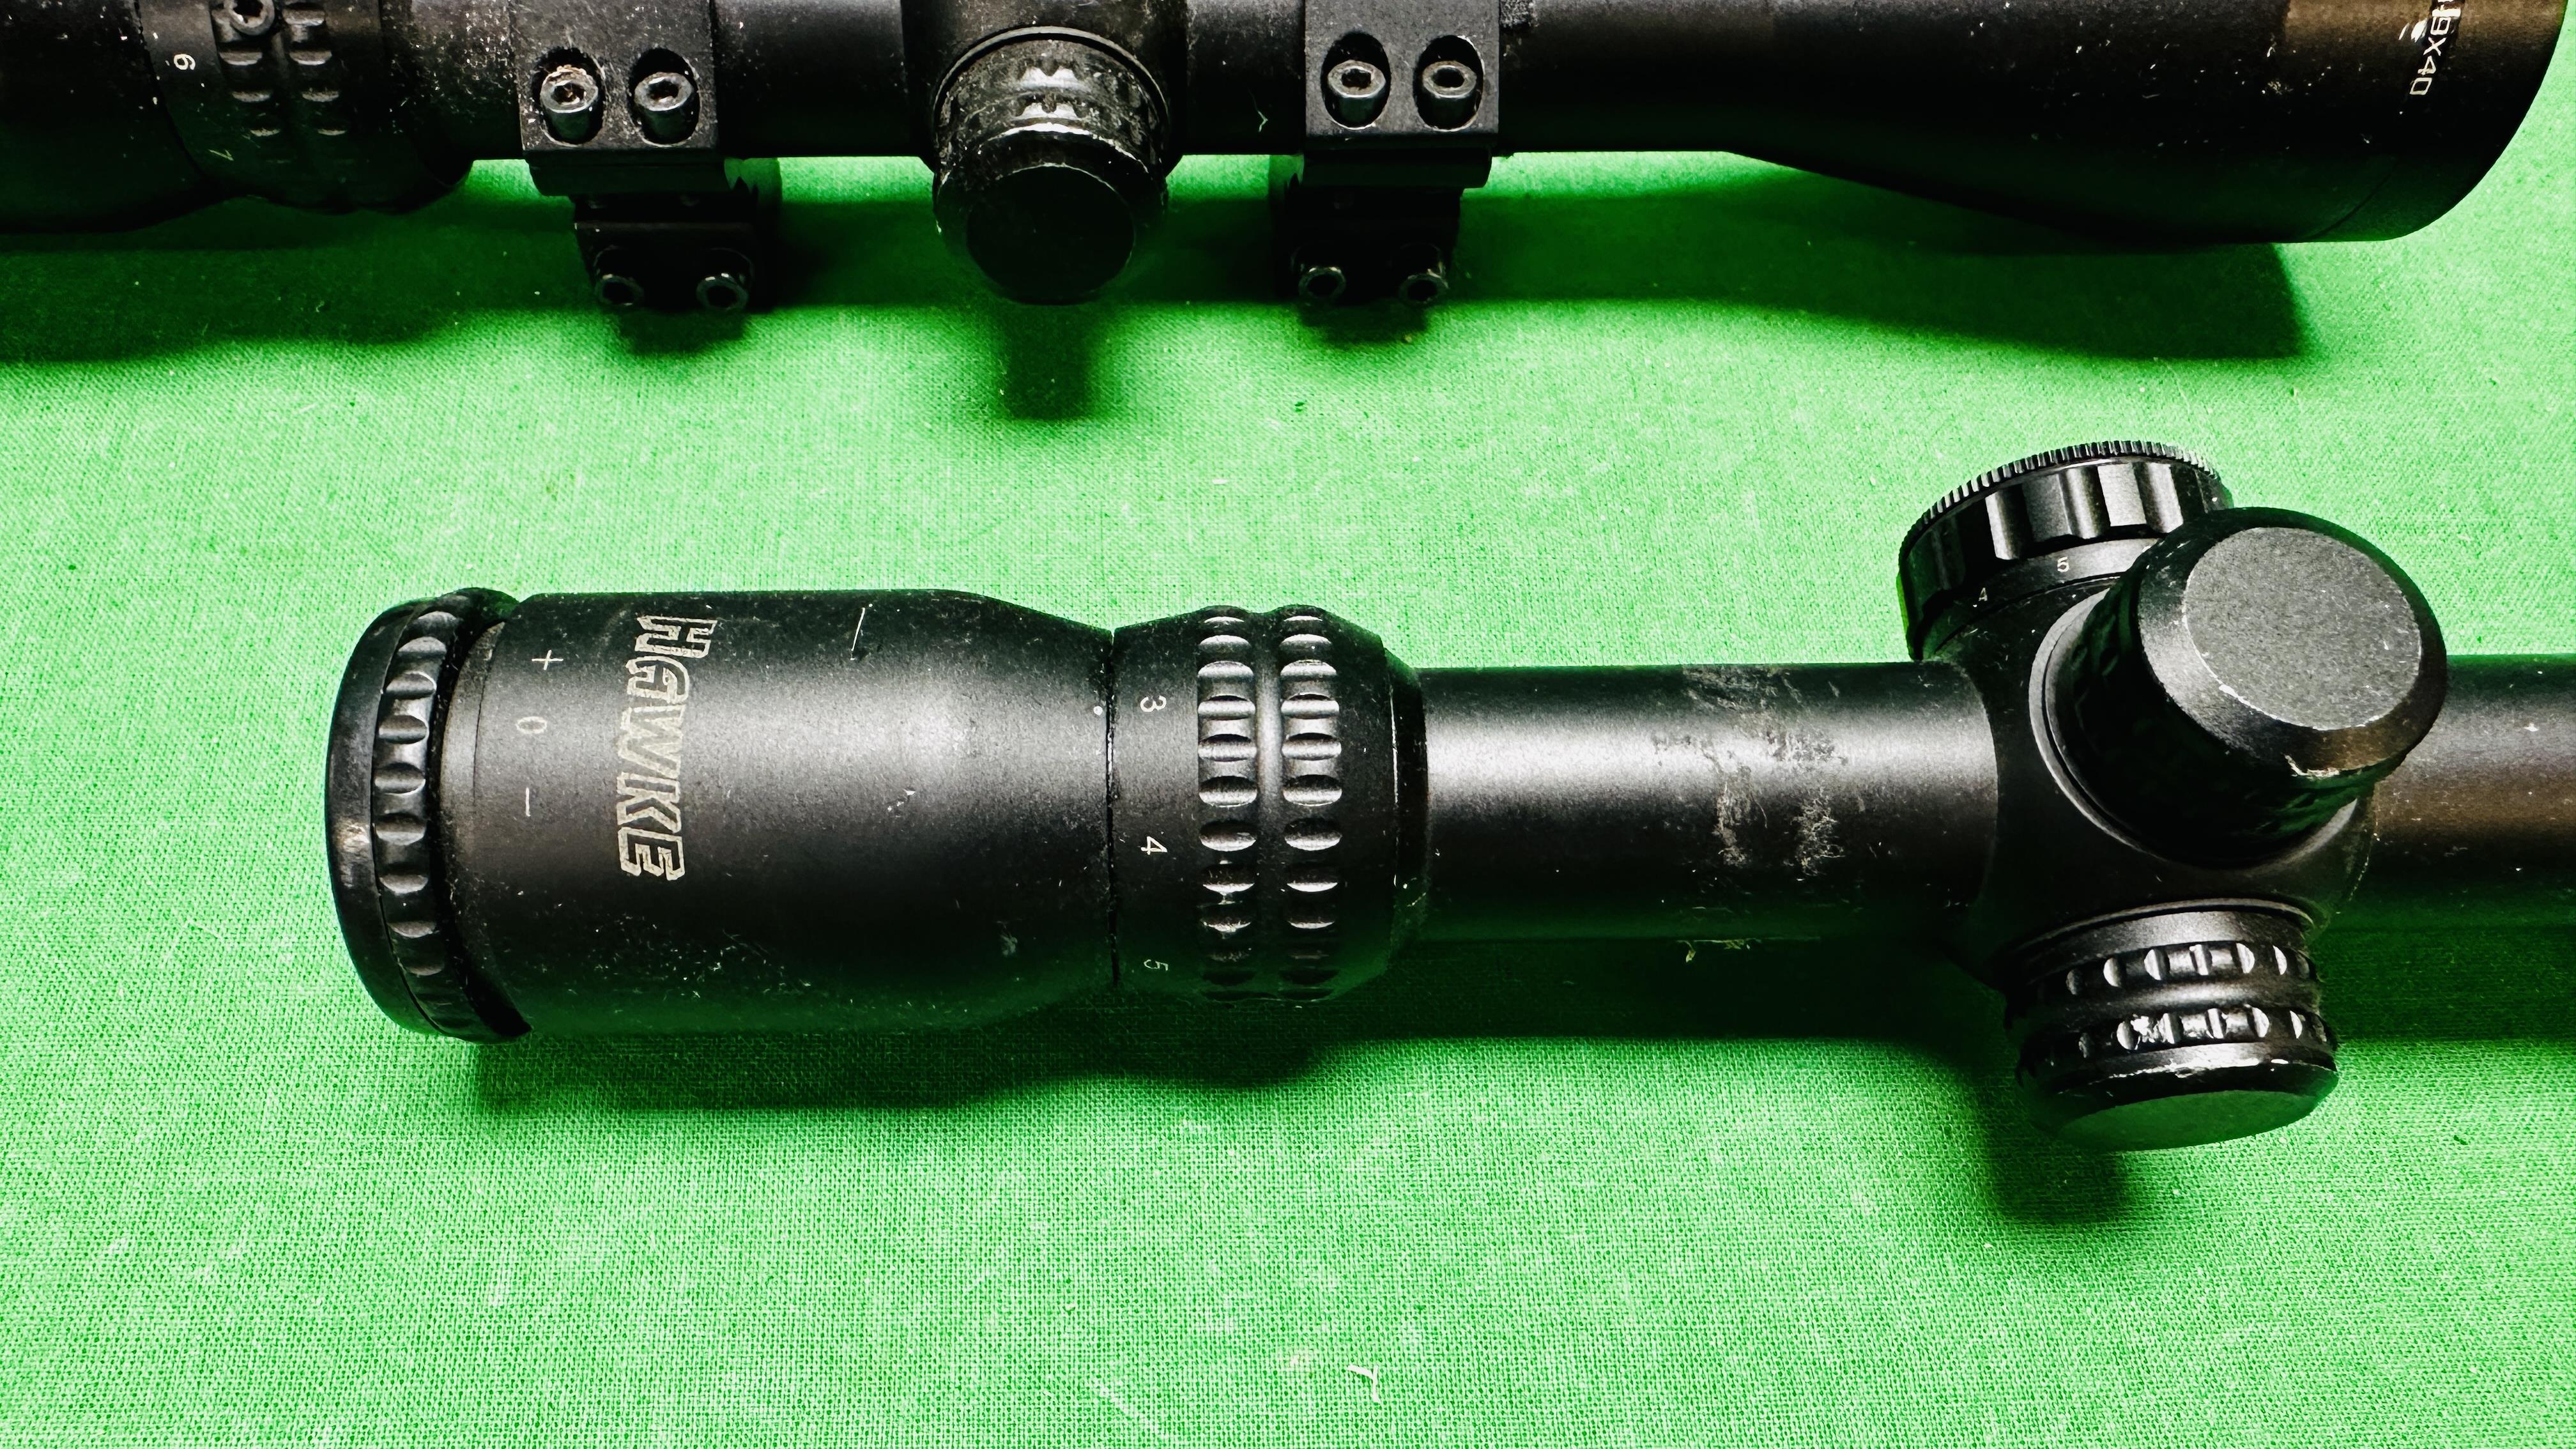 TWO HAWKE RIFLE SCOPES TO INCLUDE SPORT HD 3-9X40 WITH MOUNTS AND SPORT HD 3-9X50 AO MILL DOT IR. - Bild 2 aus 8